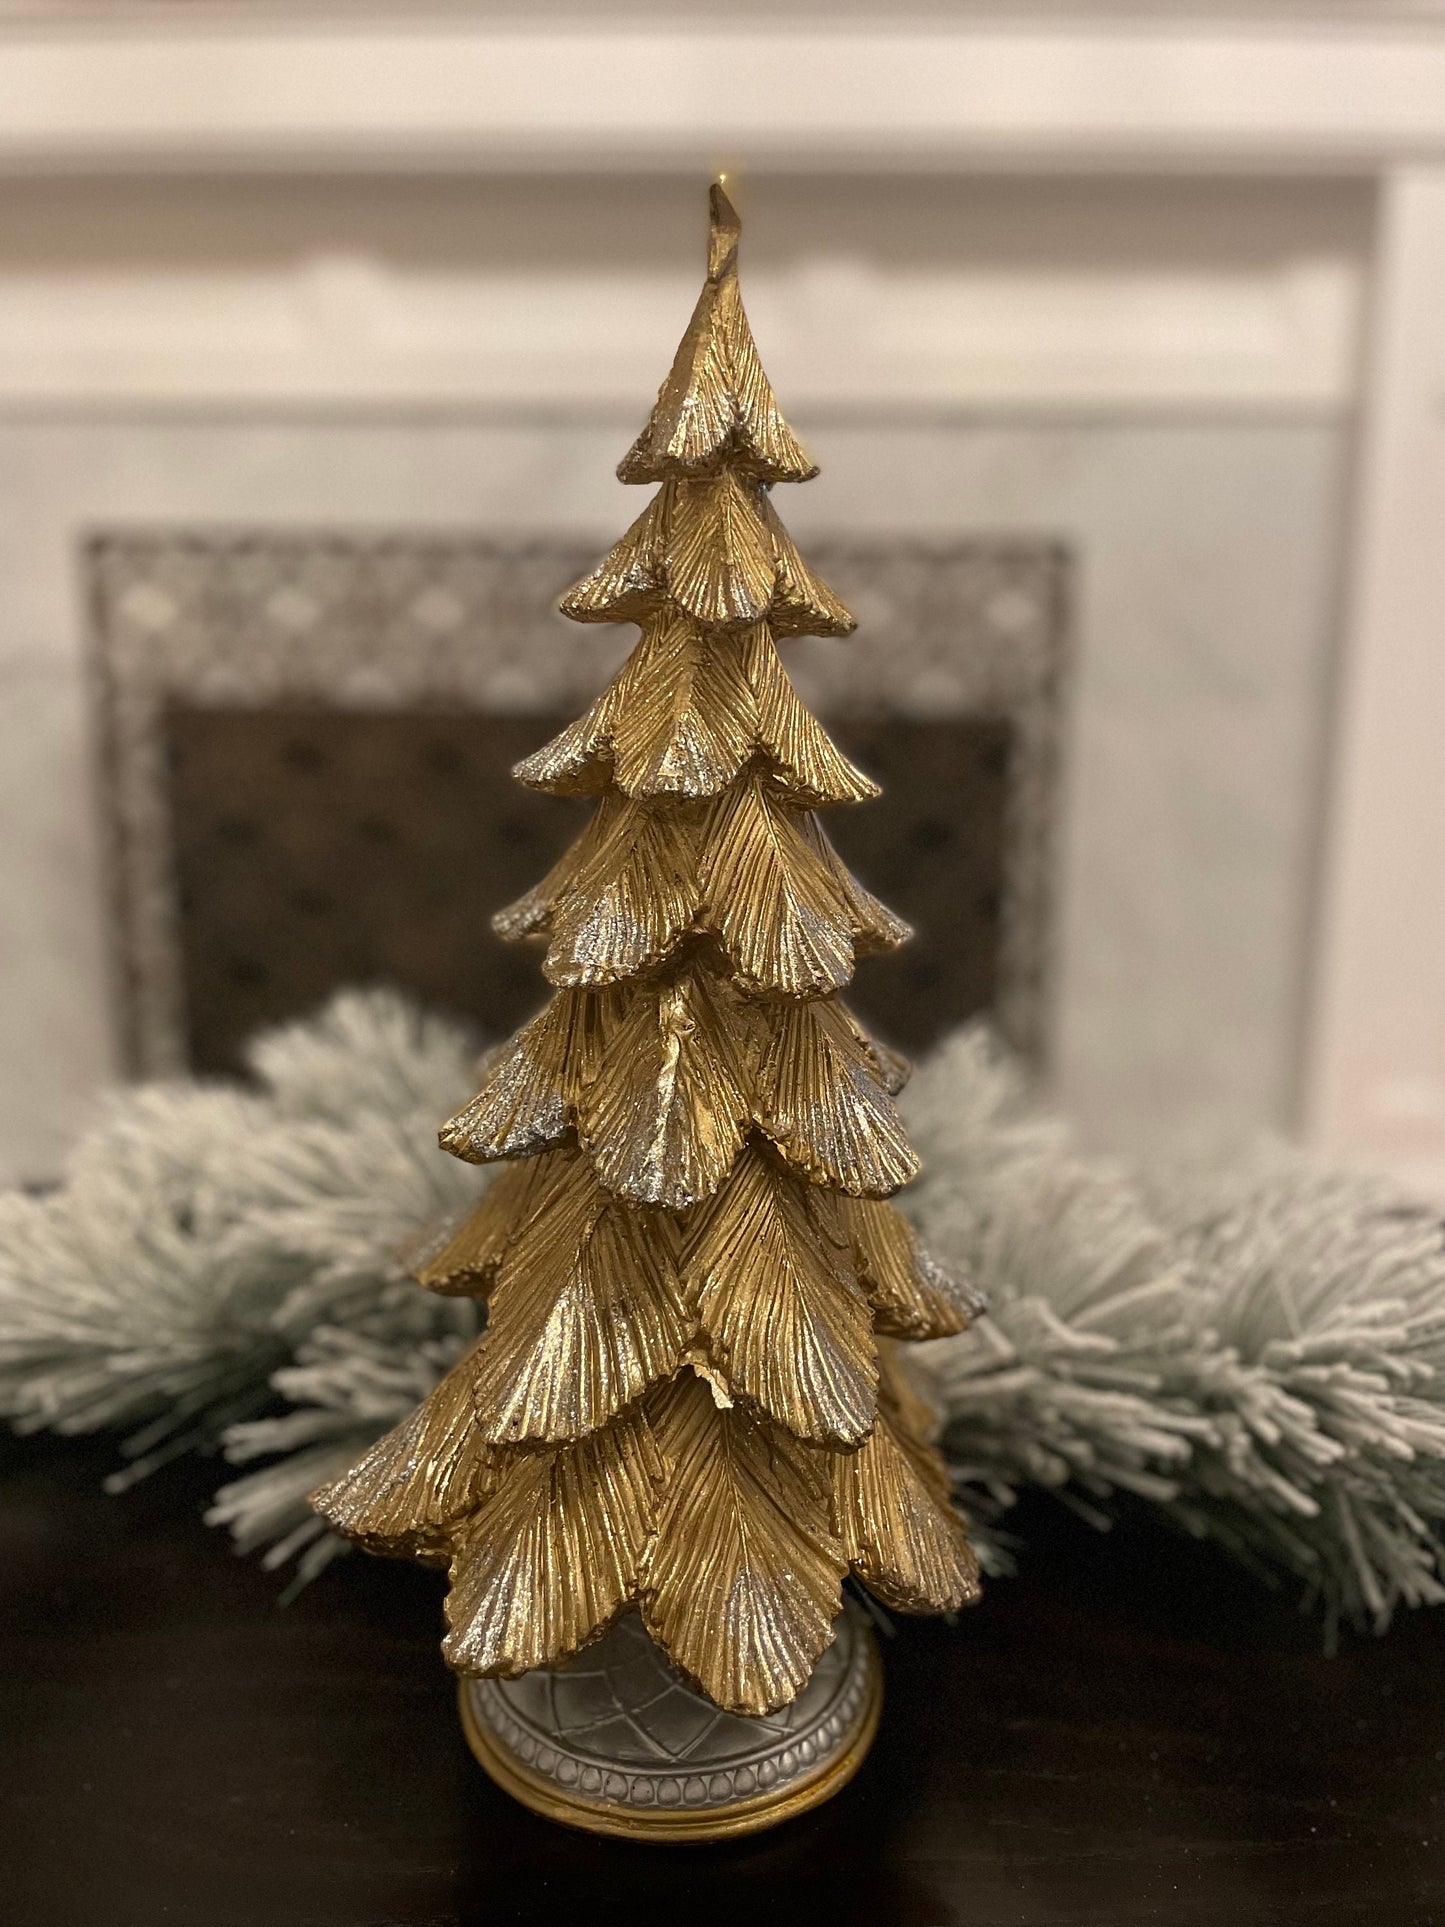 18”H x 9” W Resin gold and silver tree.